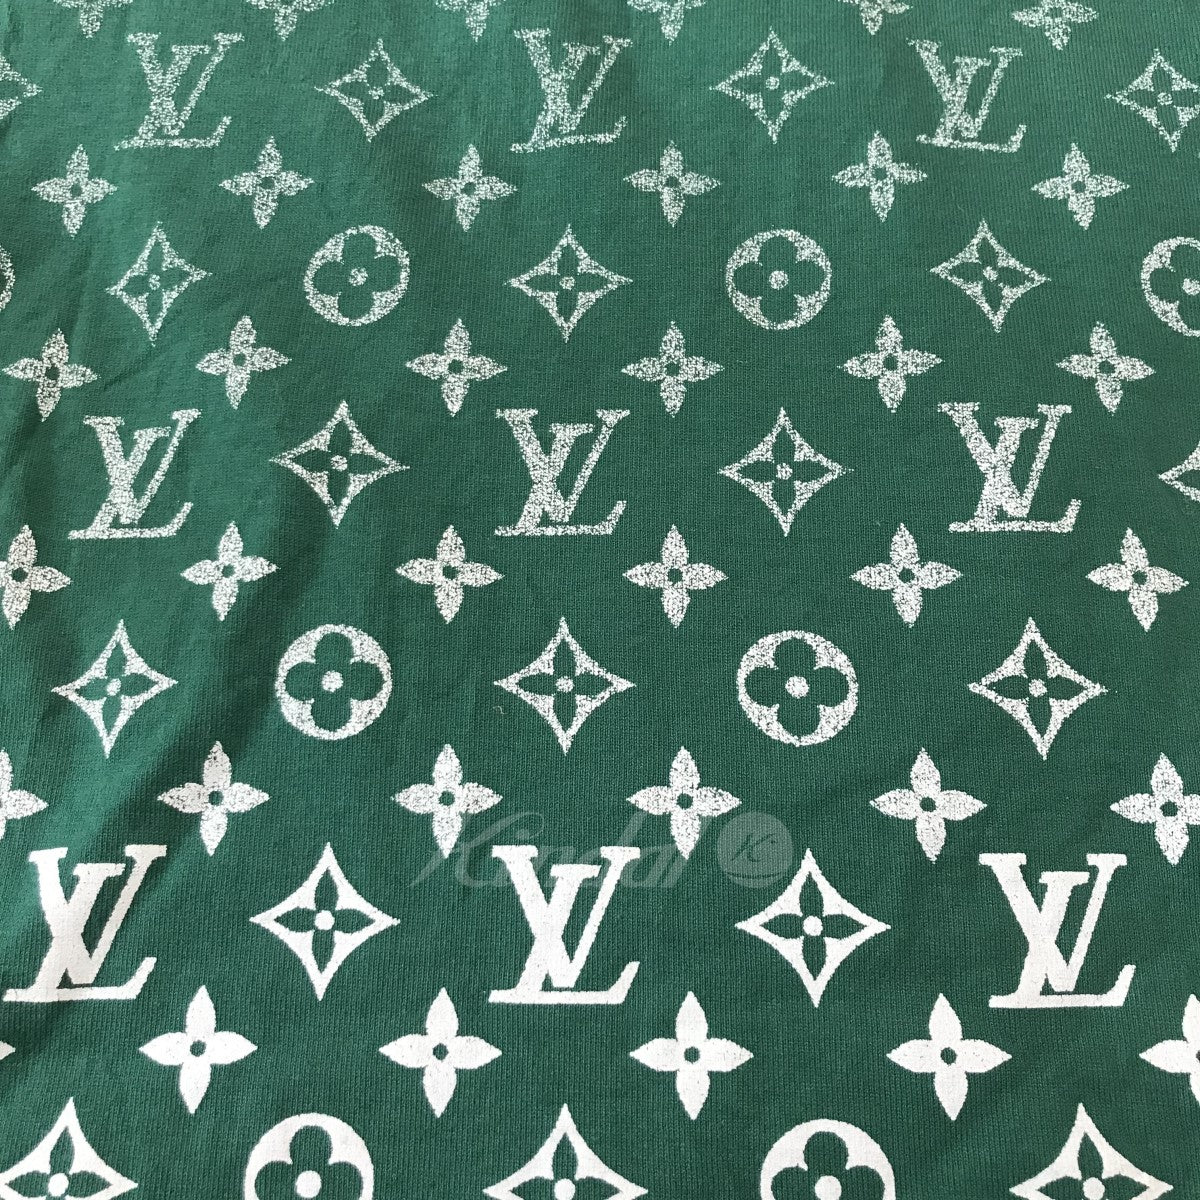 LOUIS VUITTON(ルイヴィトン) 23AW LVSEモノグラムグラディエントT ...